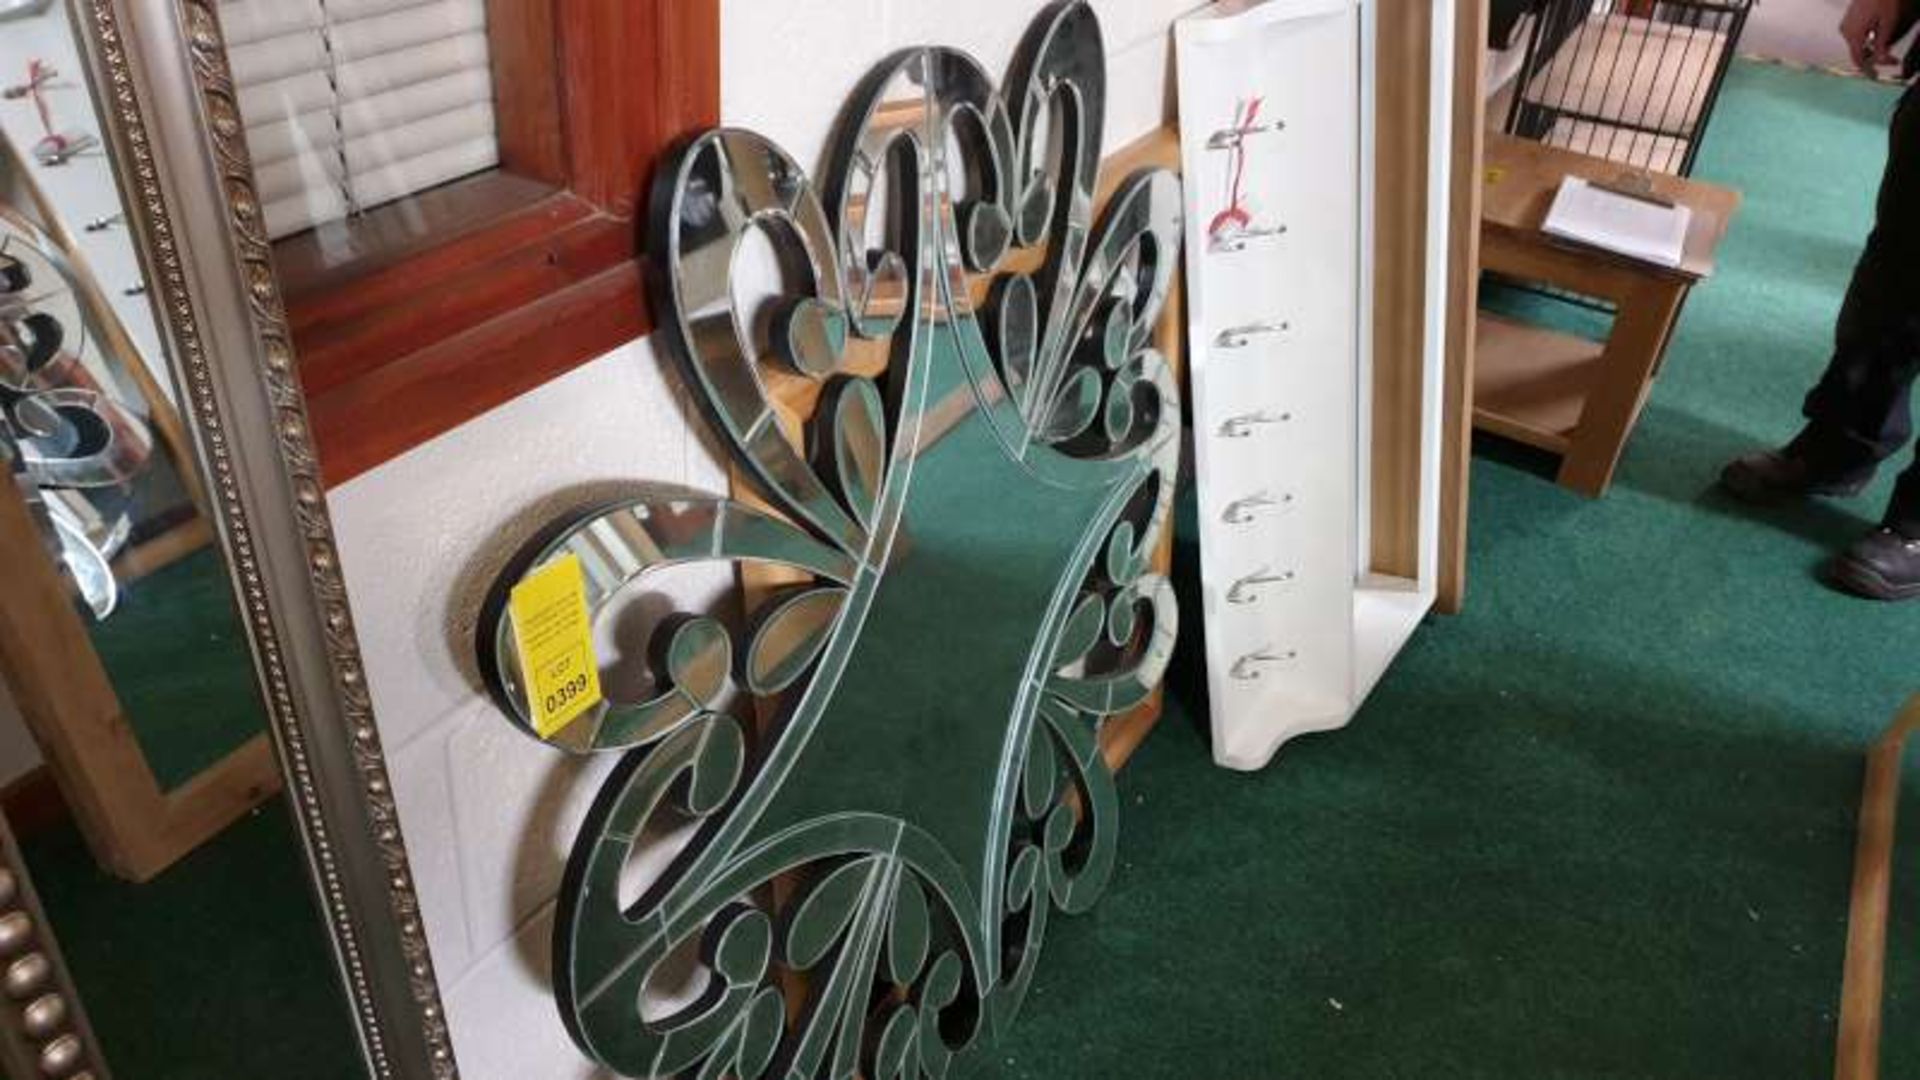 LOT CONTAINING 2 X MIRRORS AND A WOODEN MIRRORED 7 HOOK COAT HANGER